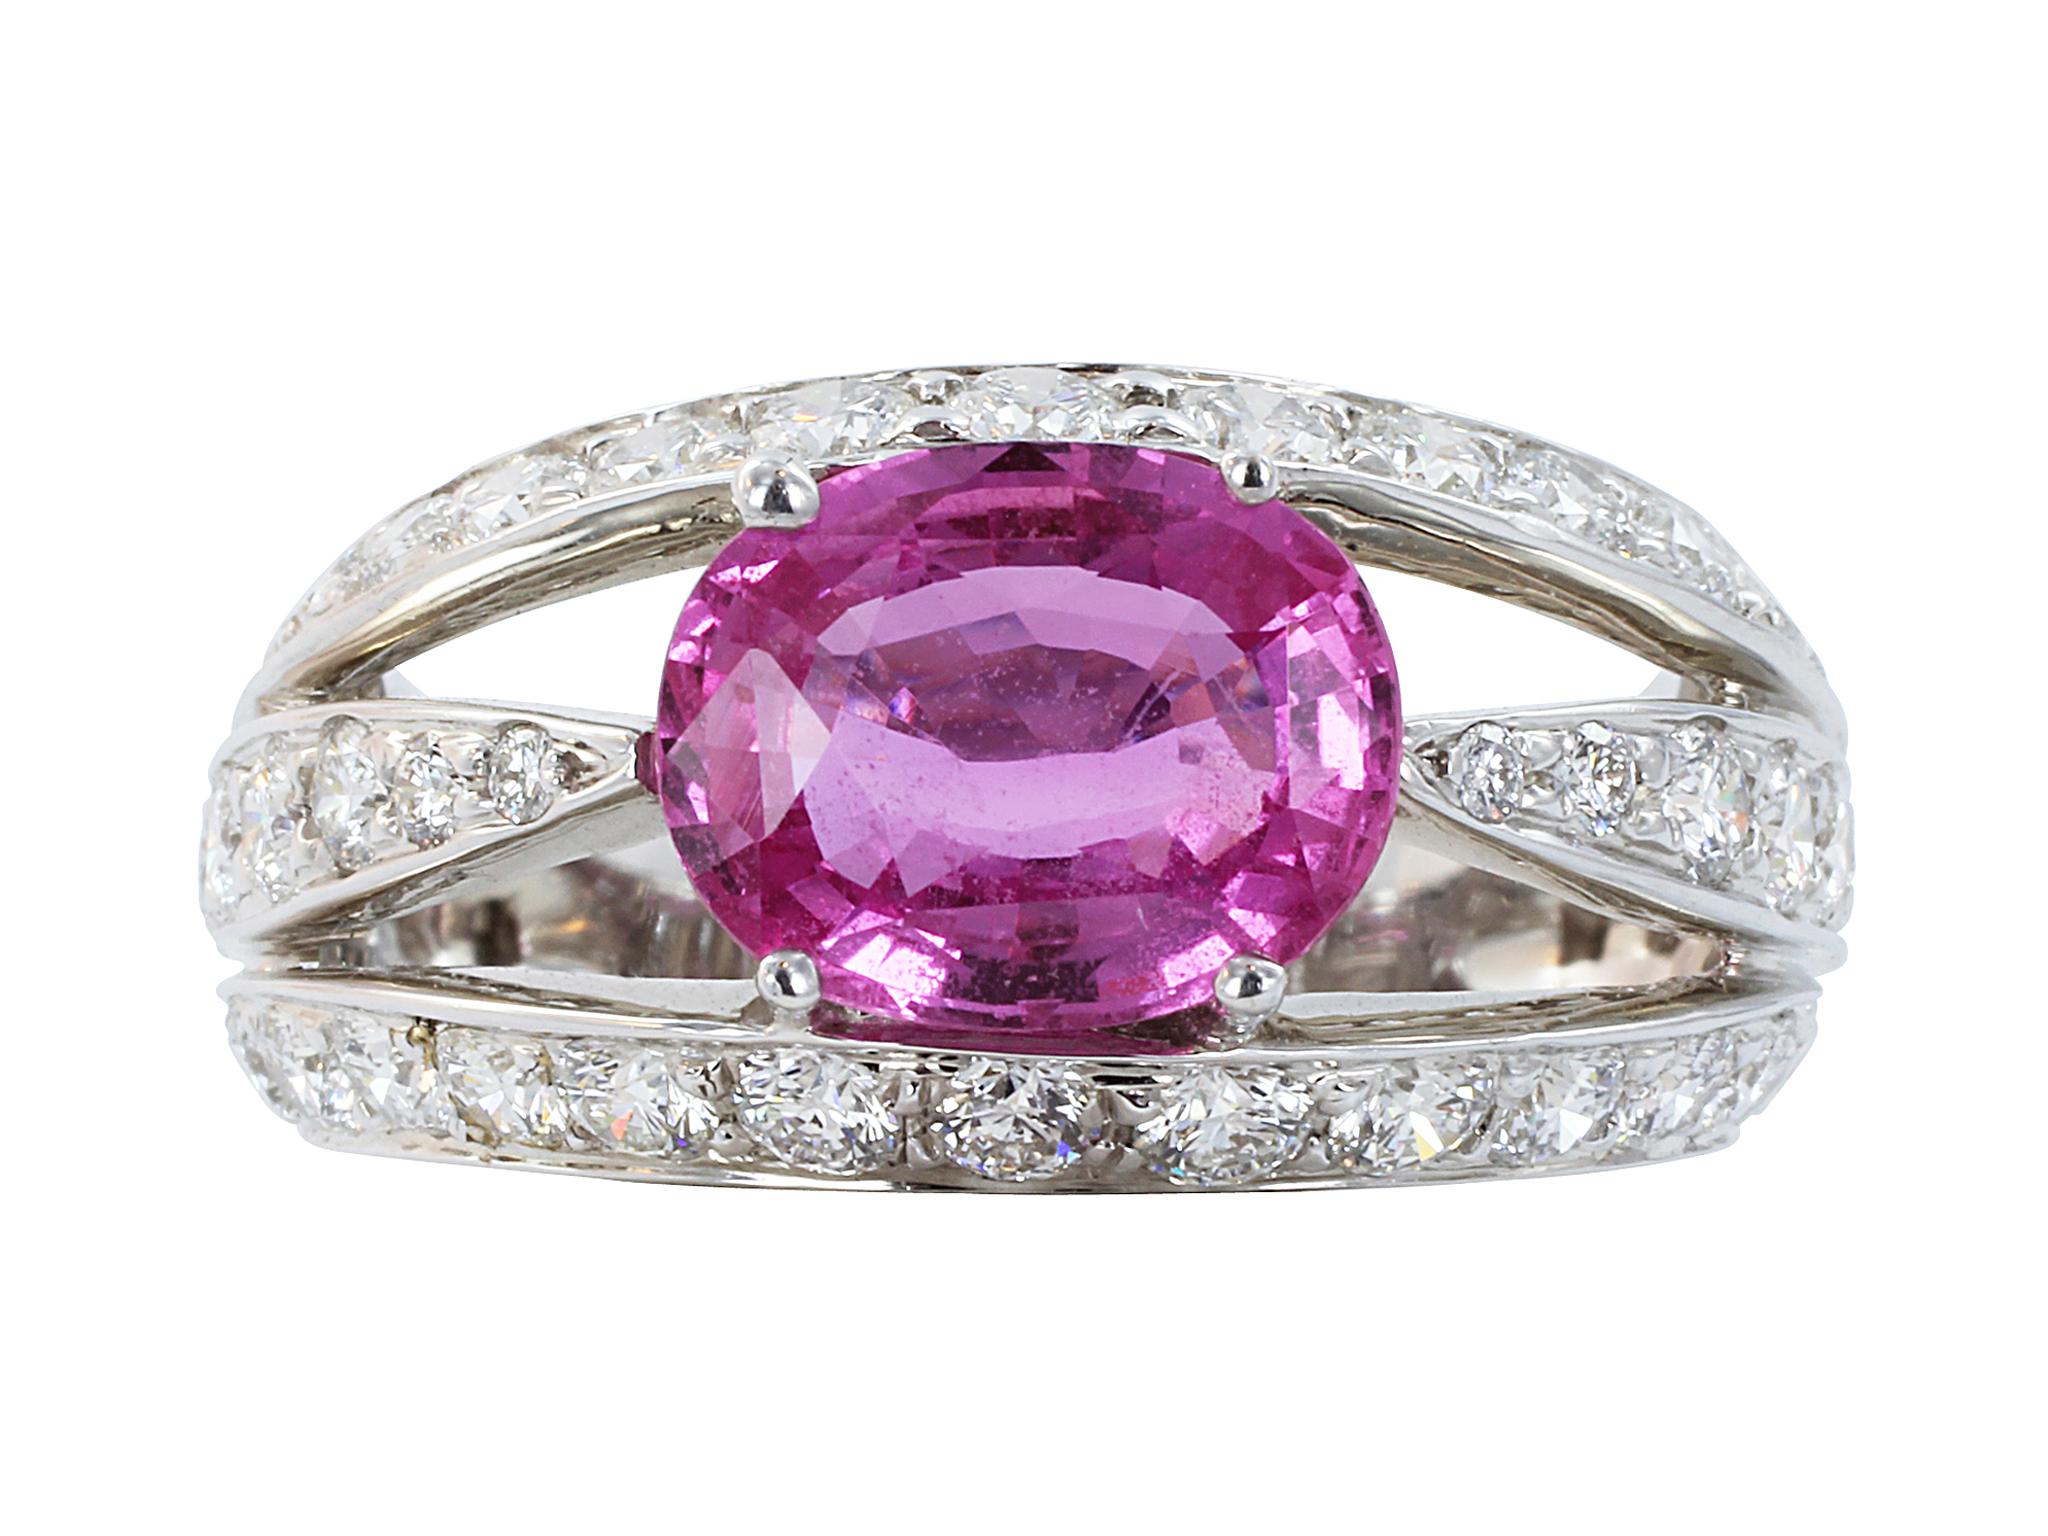 18 karat white gold ring with a split shank consisting of 1 oval prong set pink sapphire weighing 2.36 carats and accented by bead set round brilliant cut diamonds having a total weight of 1.57 carats and approximate color and clarity of F-G/VS1-VS2.